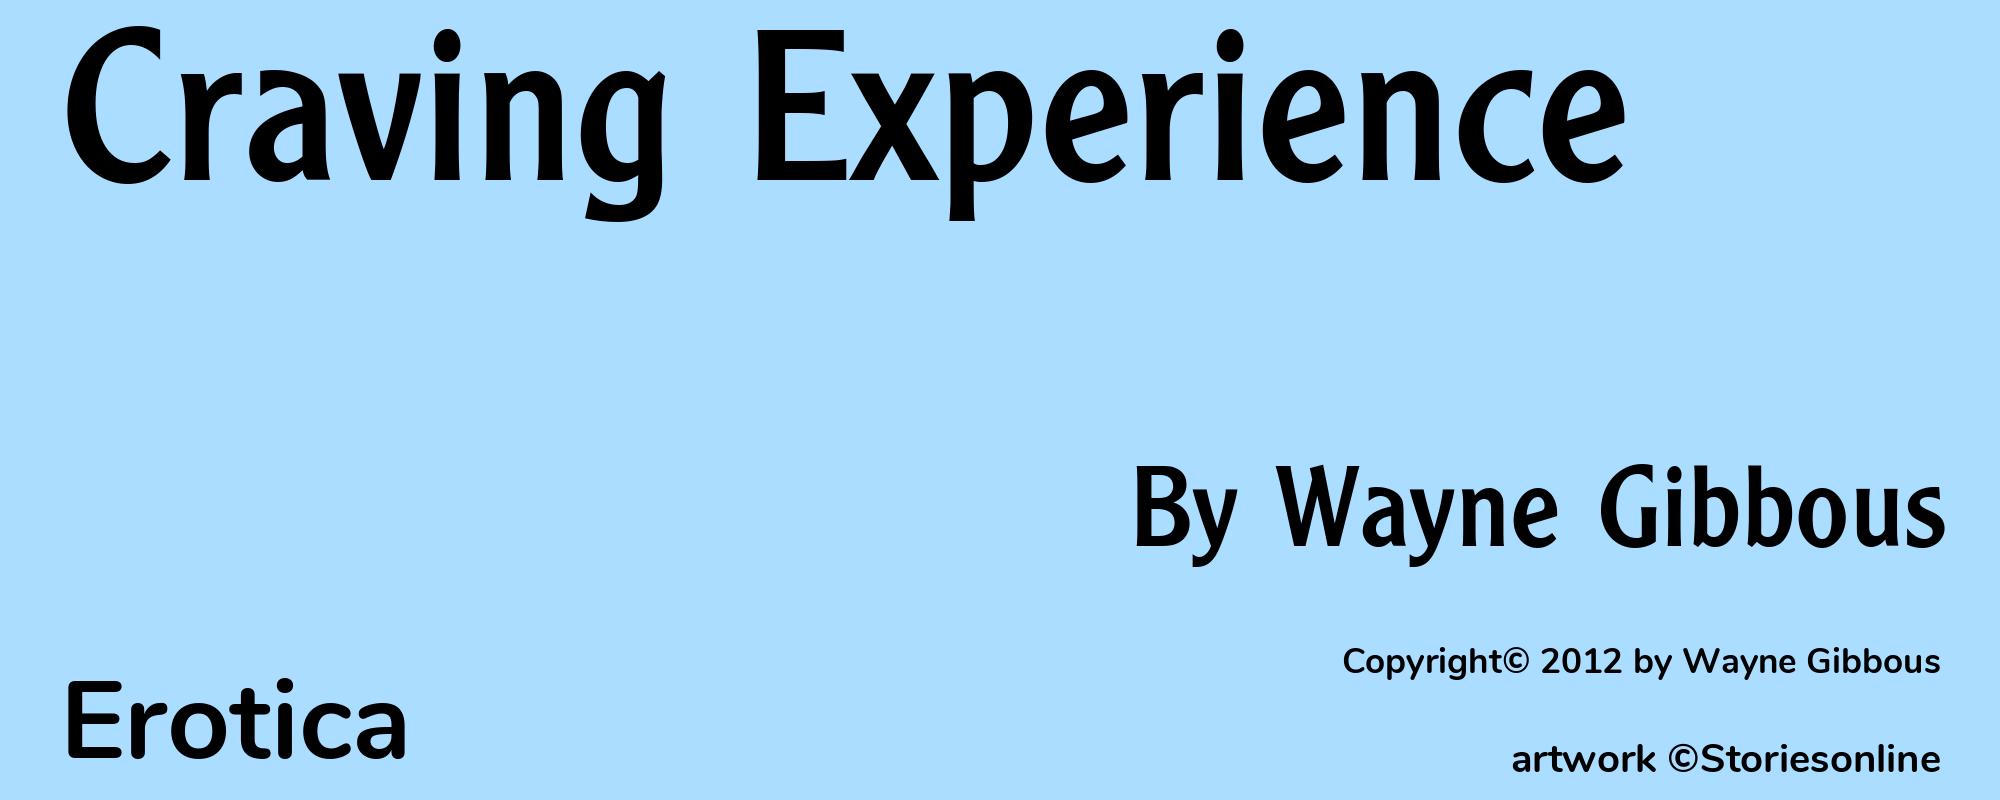 Craving Experience - Cover